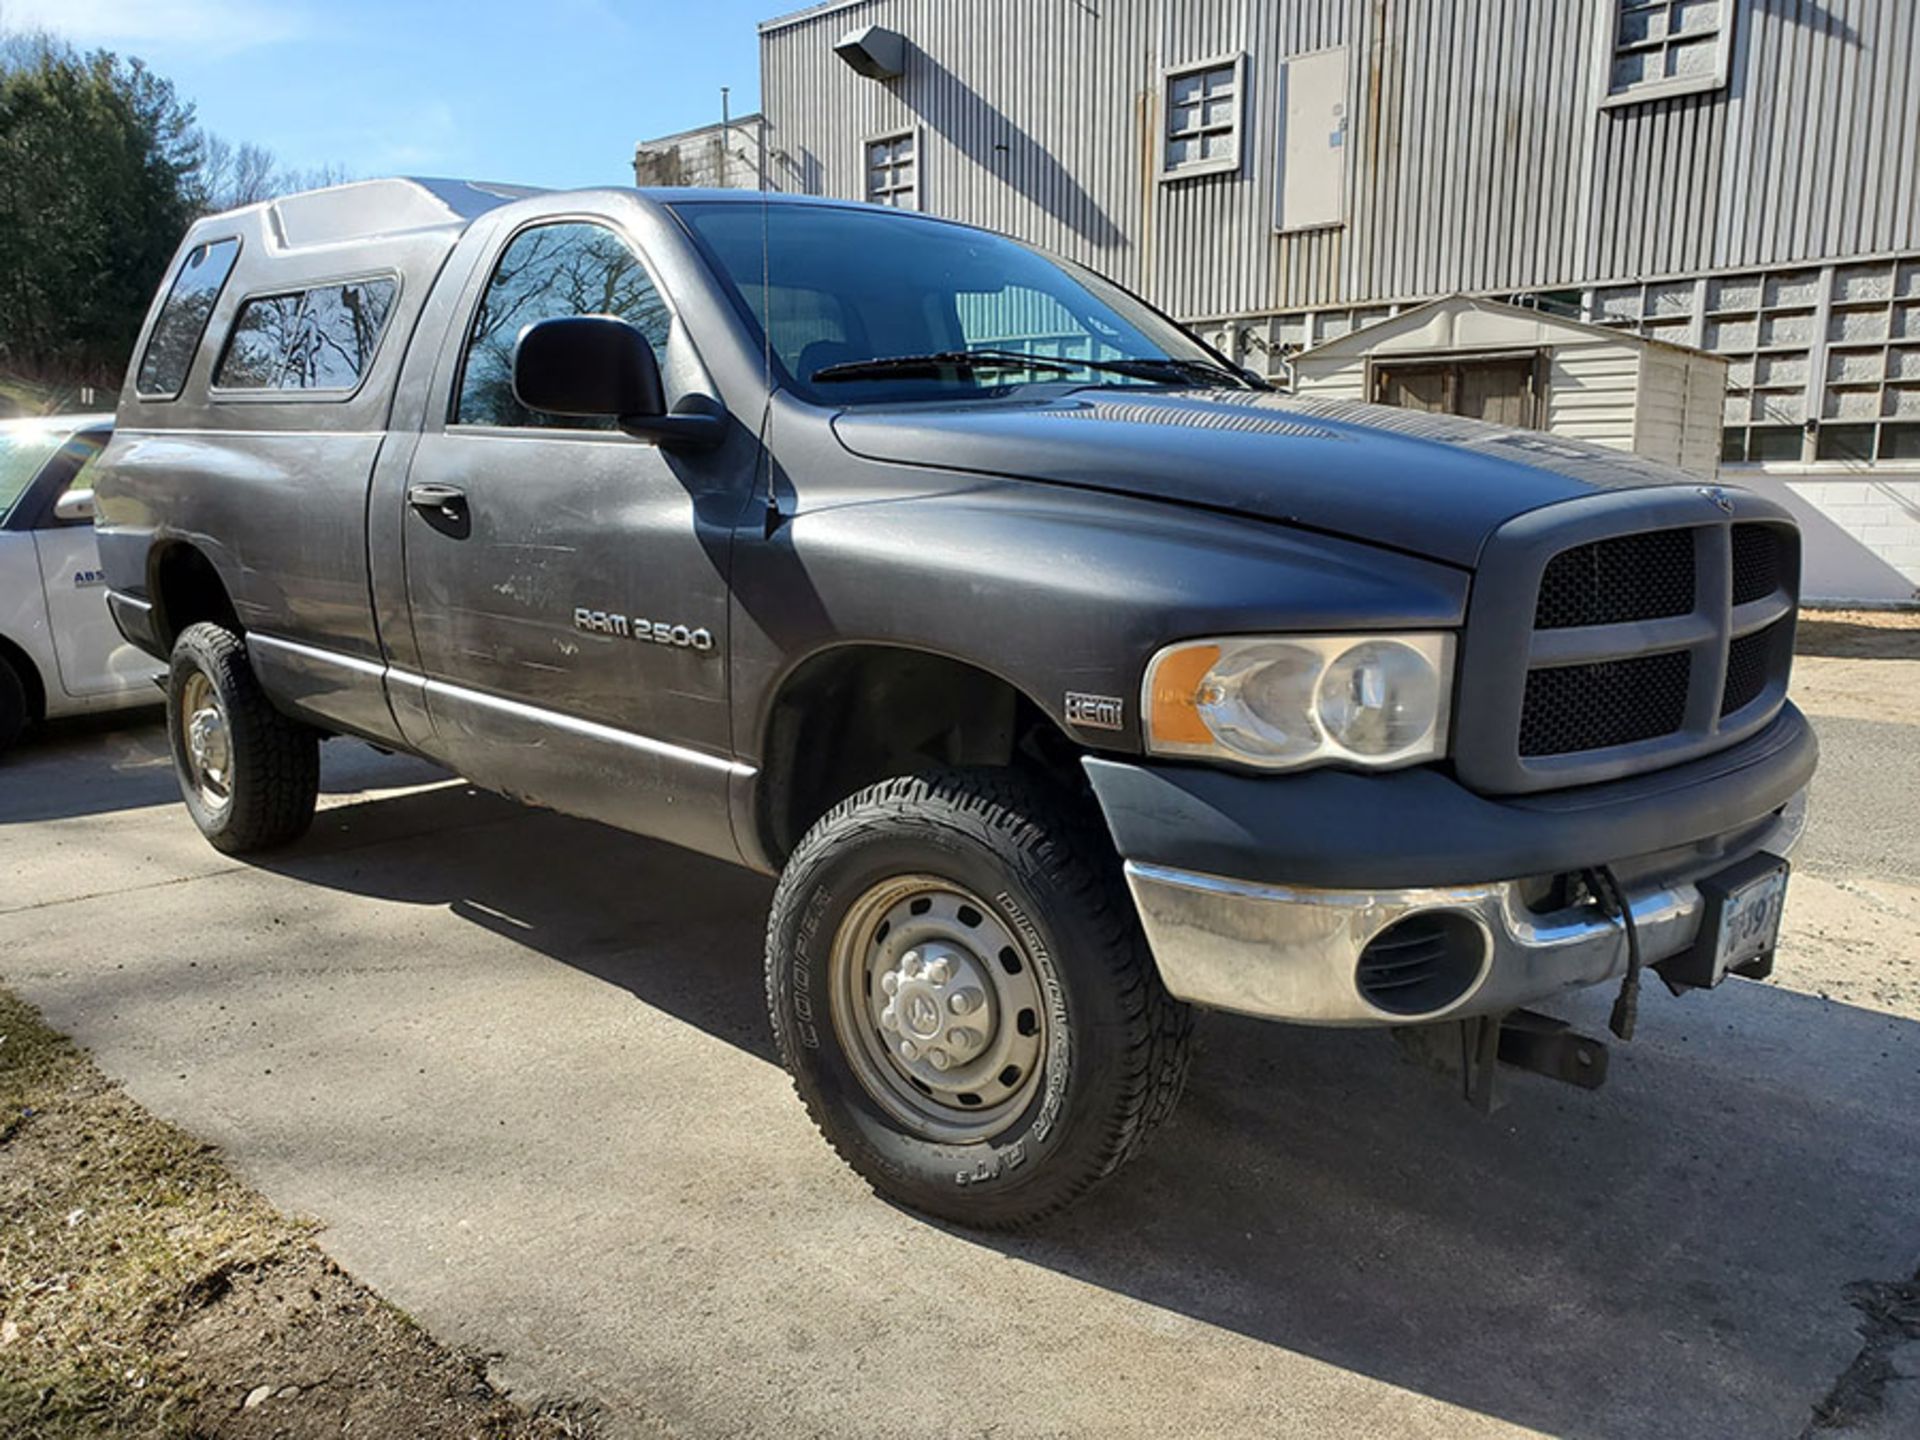 2004 DODGE 2500 4X4 PICKUP TRUCK; WITH 5.7 LITER HEMI MAGNUM, CAMPER SHELL, MINUTE MOUNT (2) - Image 11 of 23